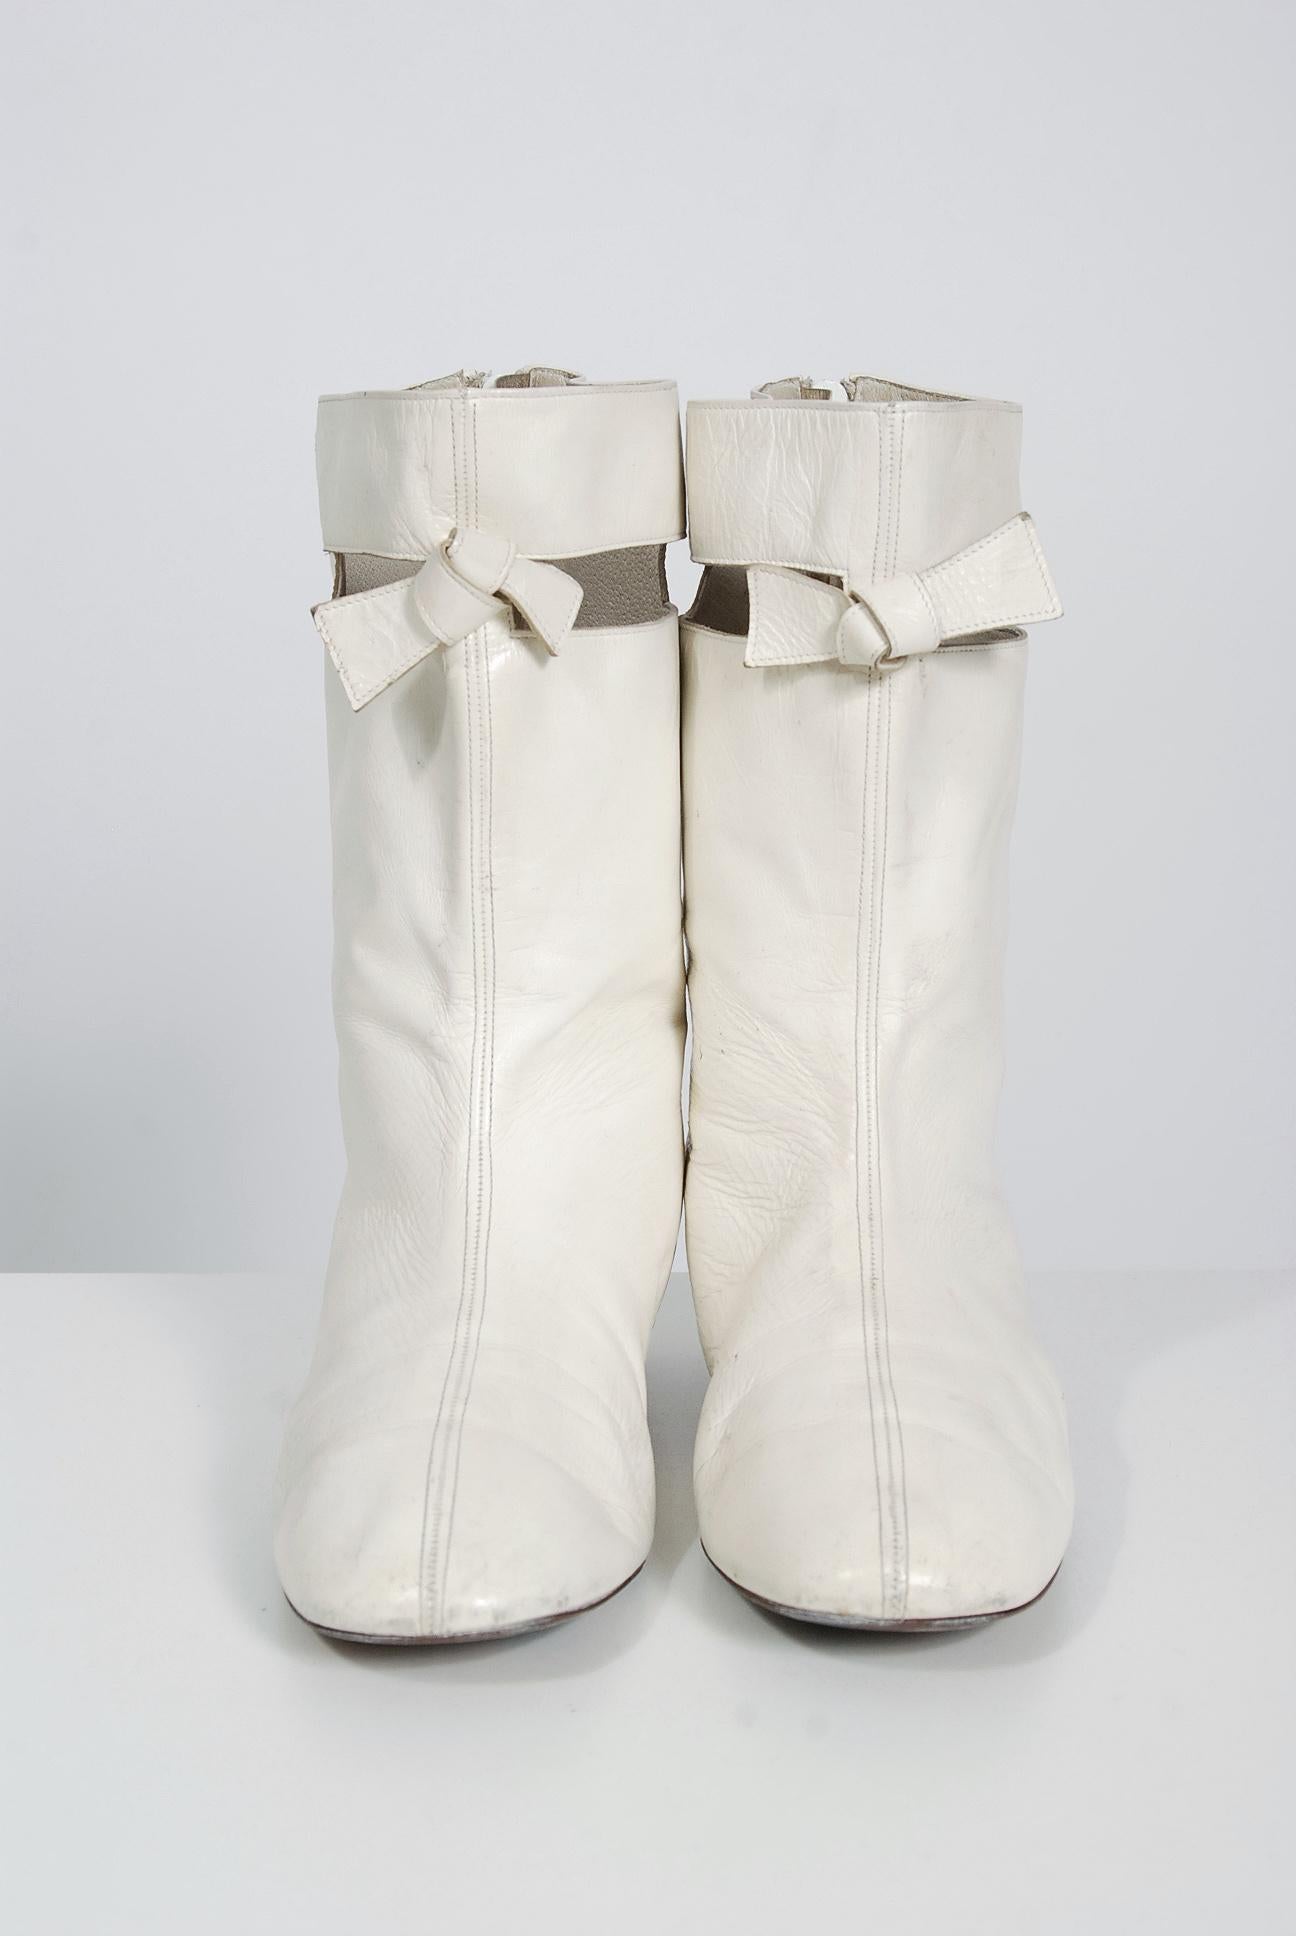 Rare Andre Courreges white leather boots from his iconic 1965 Space-Age collection. The main features of his ultra-modern, uncluttered look spread quickly throughout the fashion world, especially the miniskirt, which he introduced to France. I love